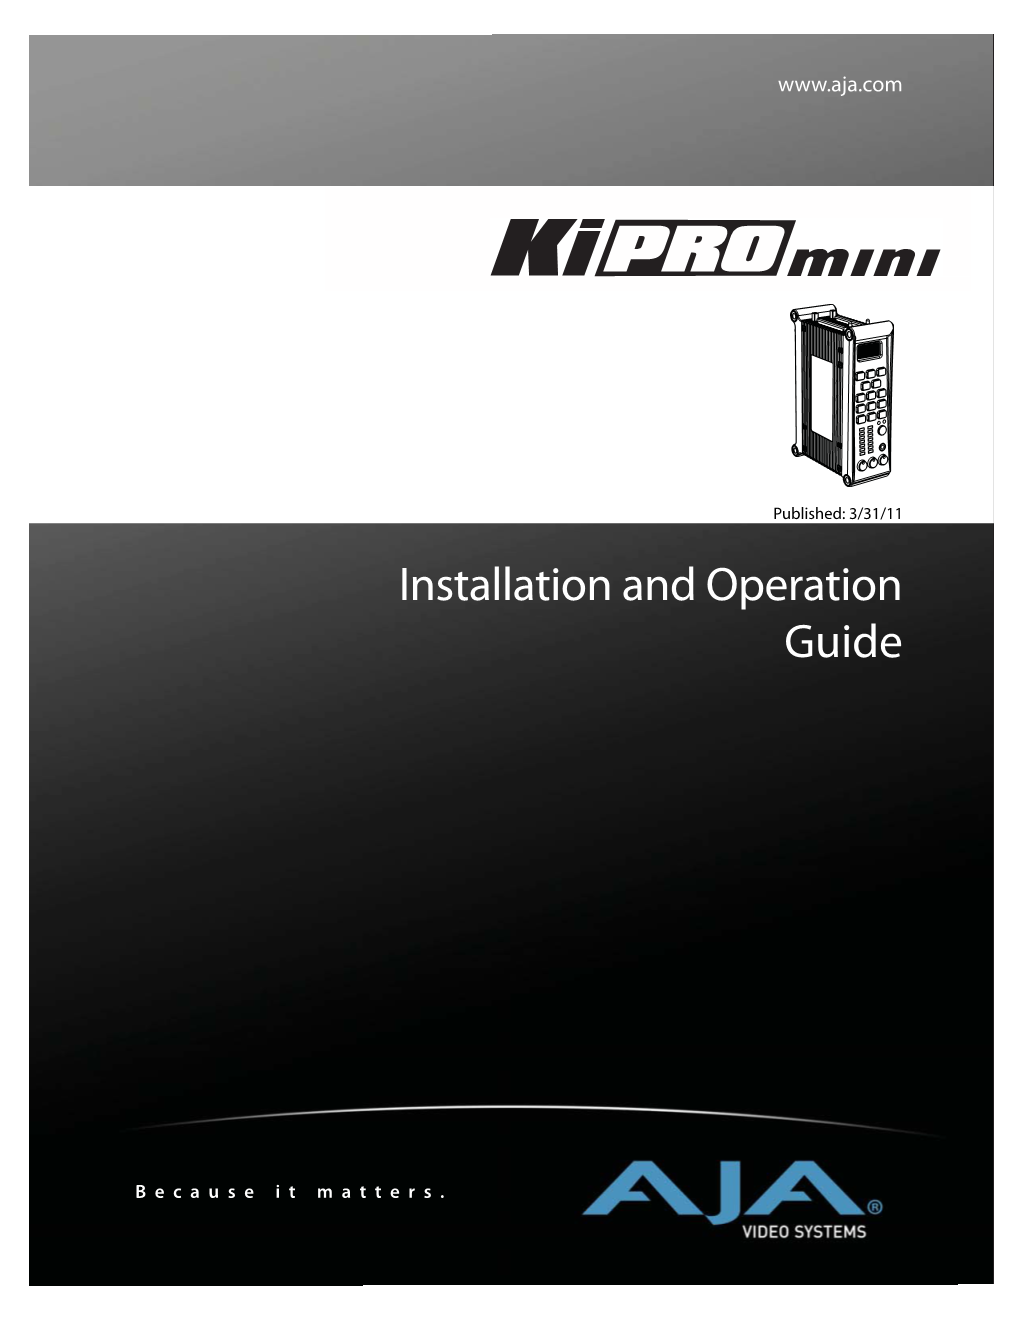 Installation and Operation Guide